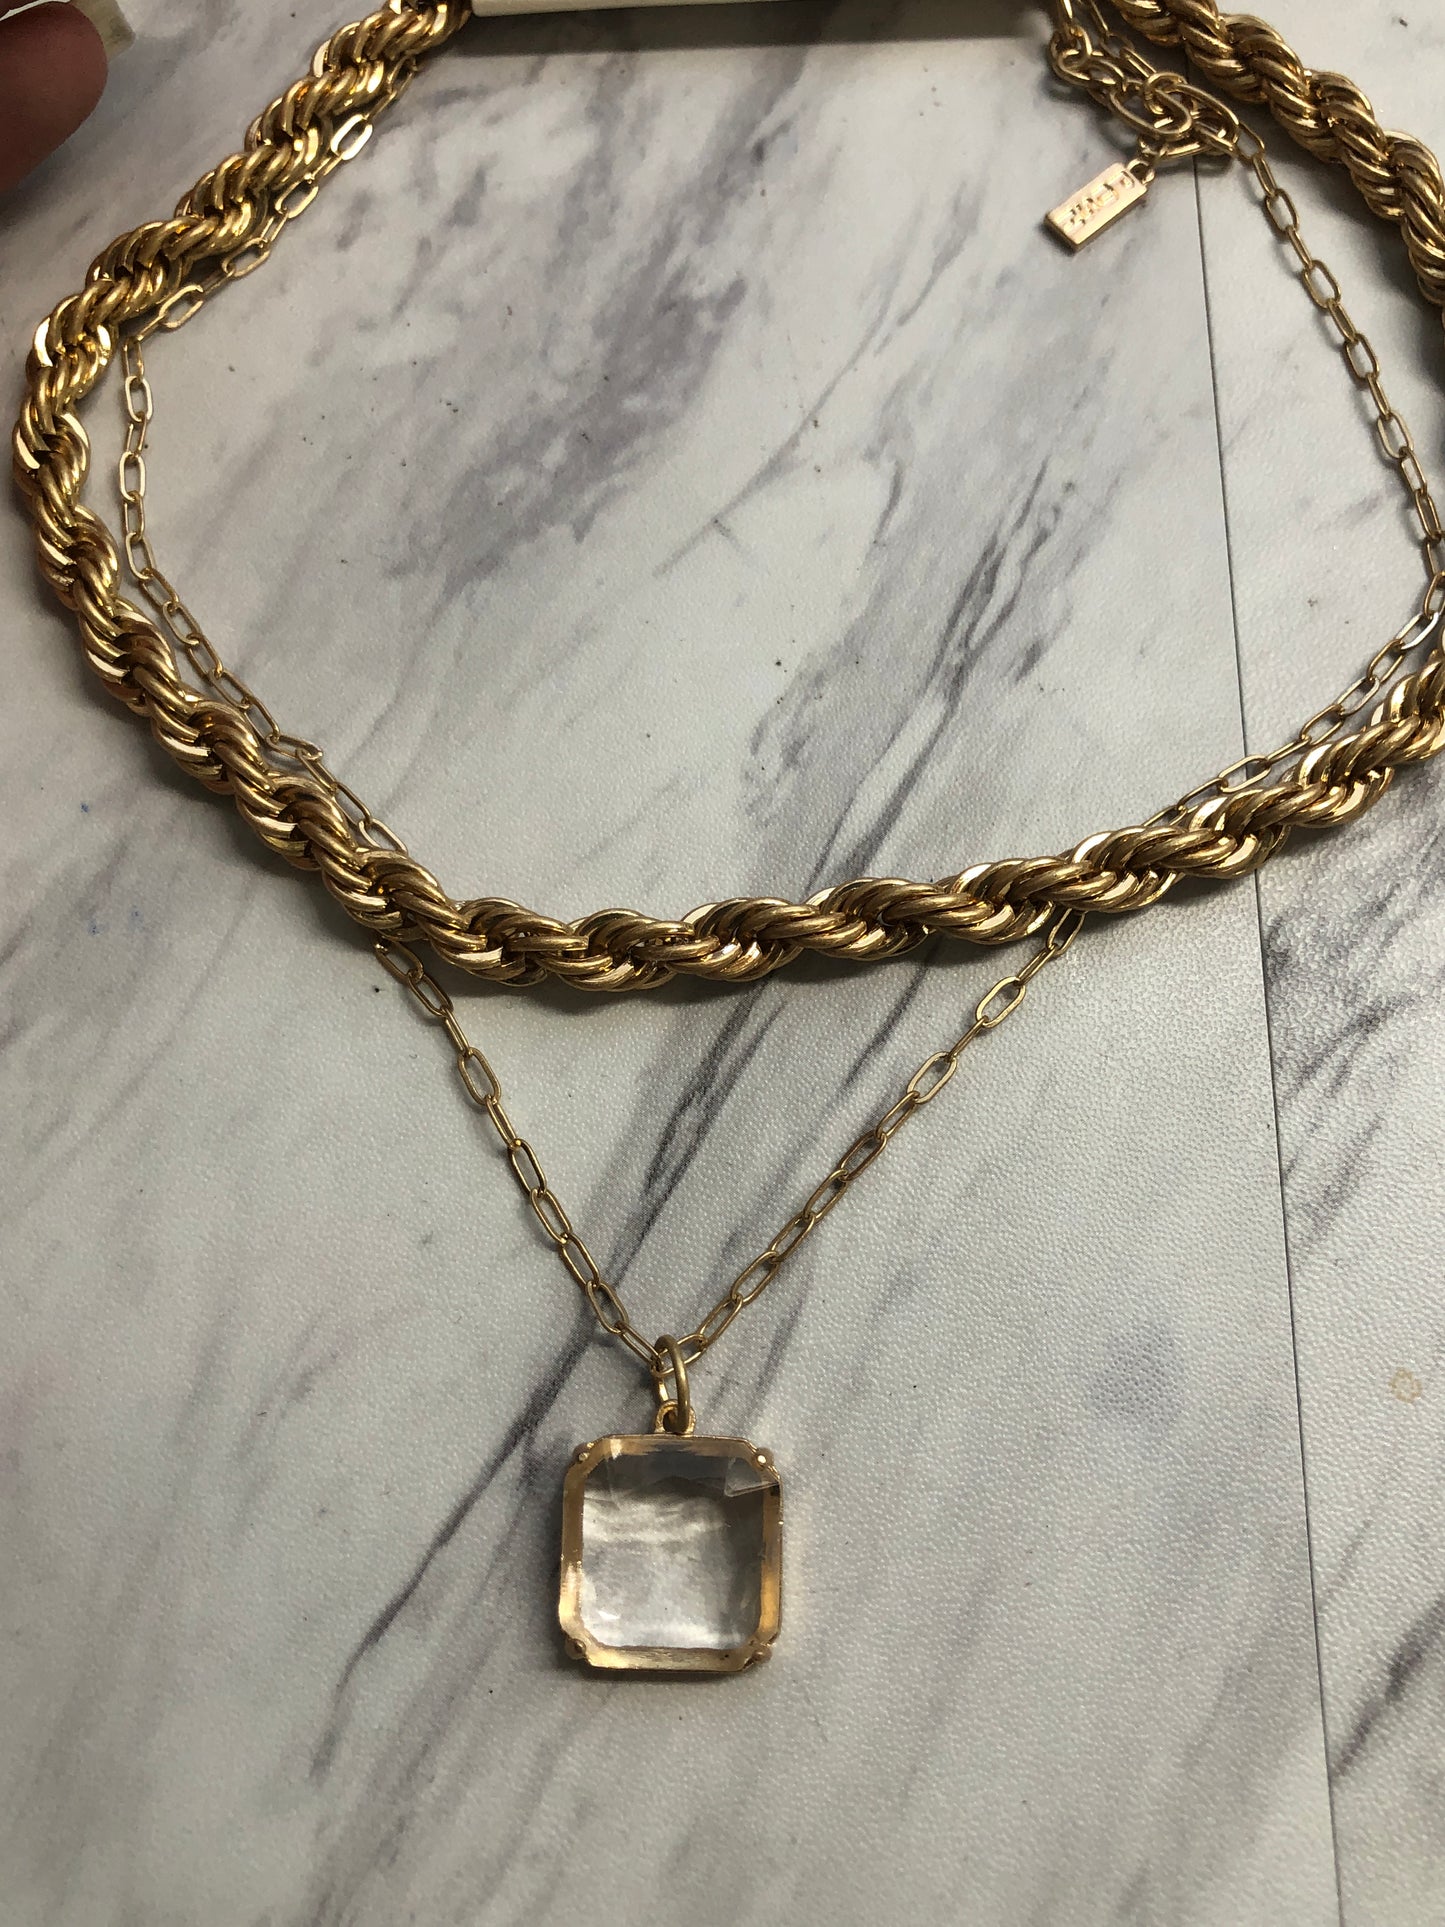 Matte Gold Braided Chain Necklace with Drop Crystal